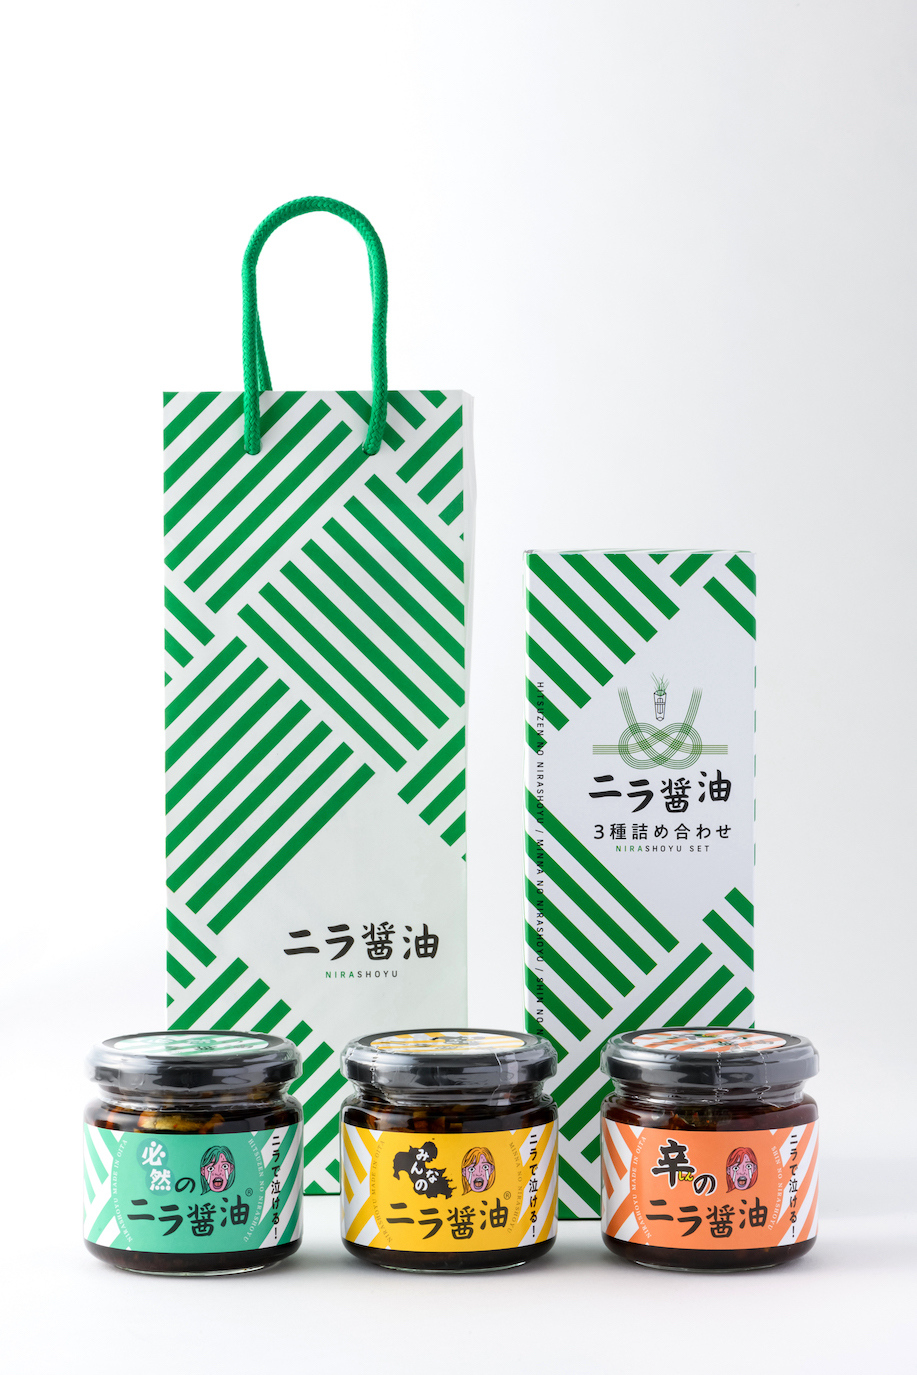 Assortment of 3 types of Nilla Soy Sauce